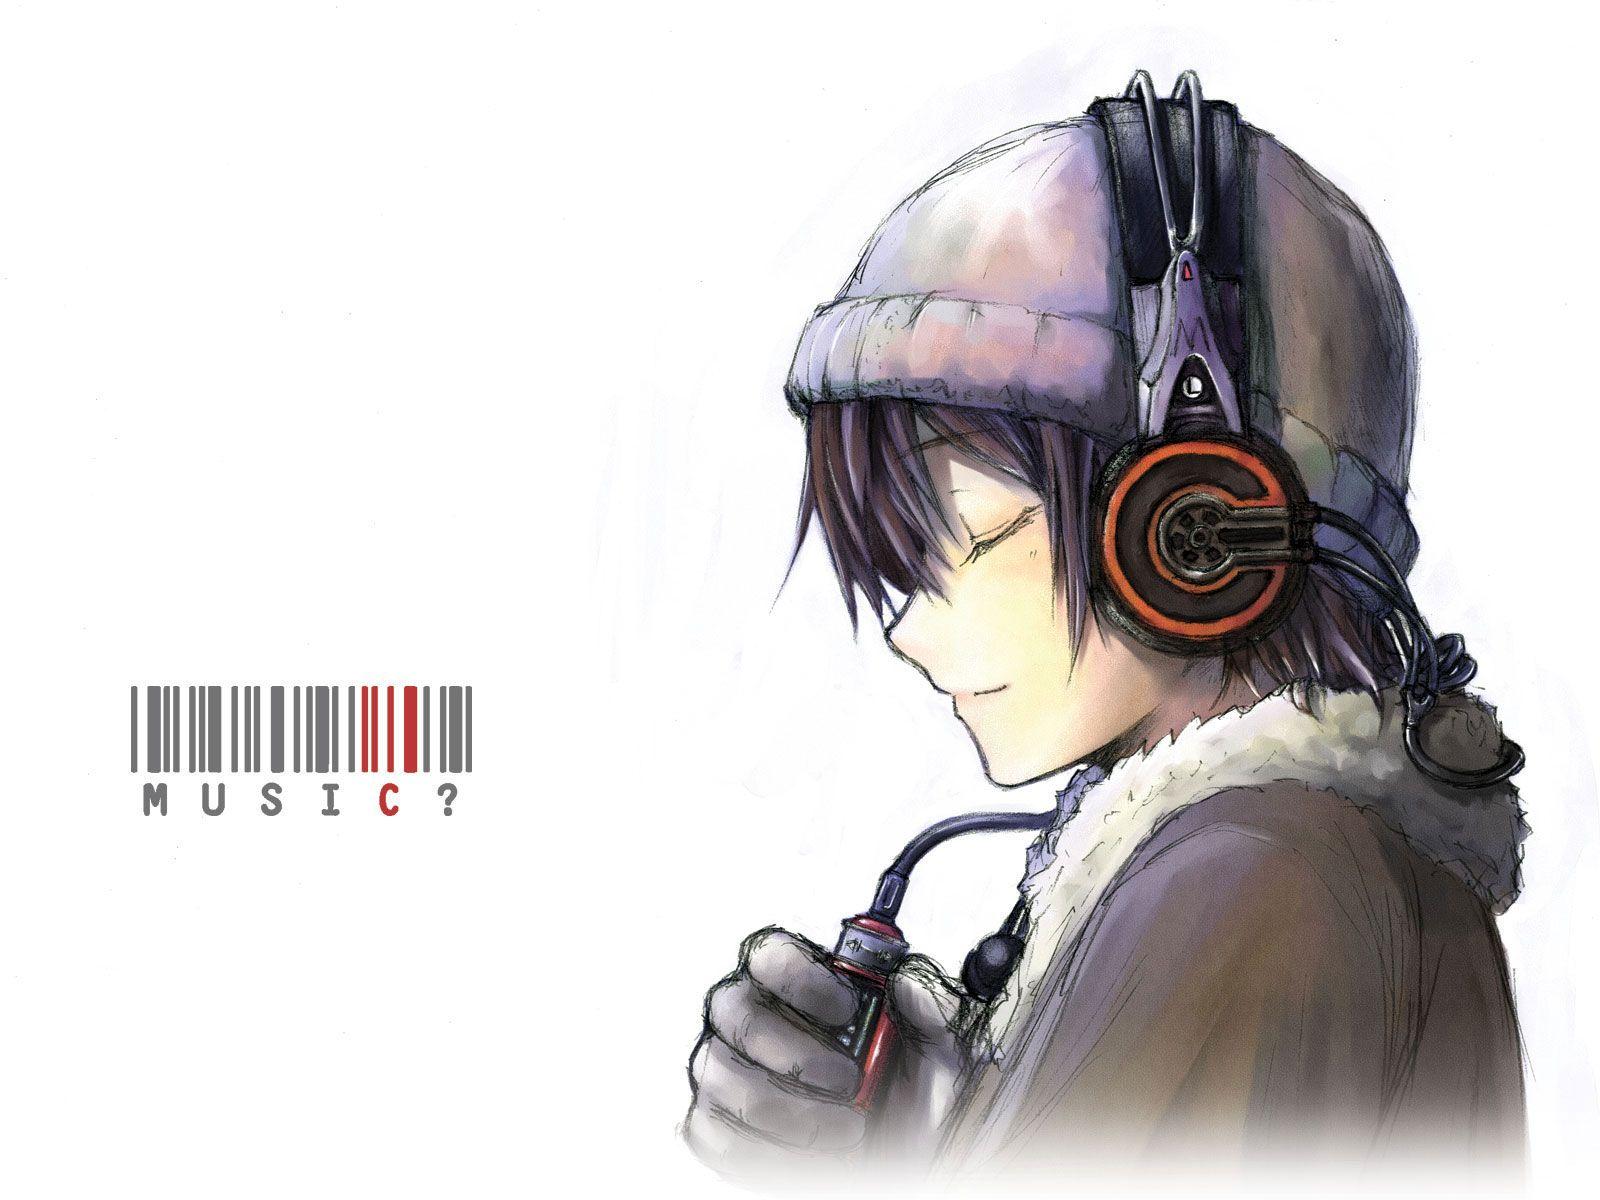 Featured image of post Fanart Anime Boy Gamer / Download, share or upload your own one!